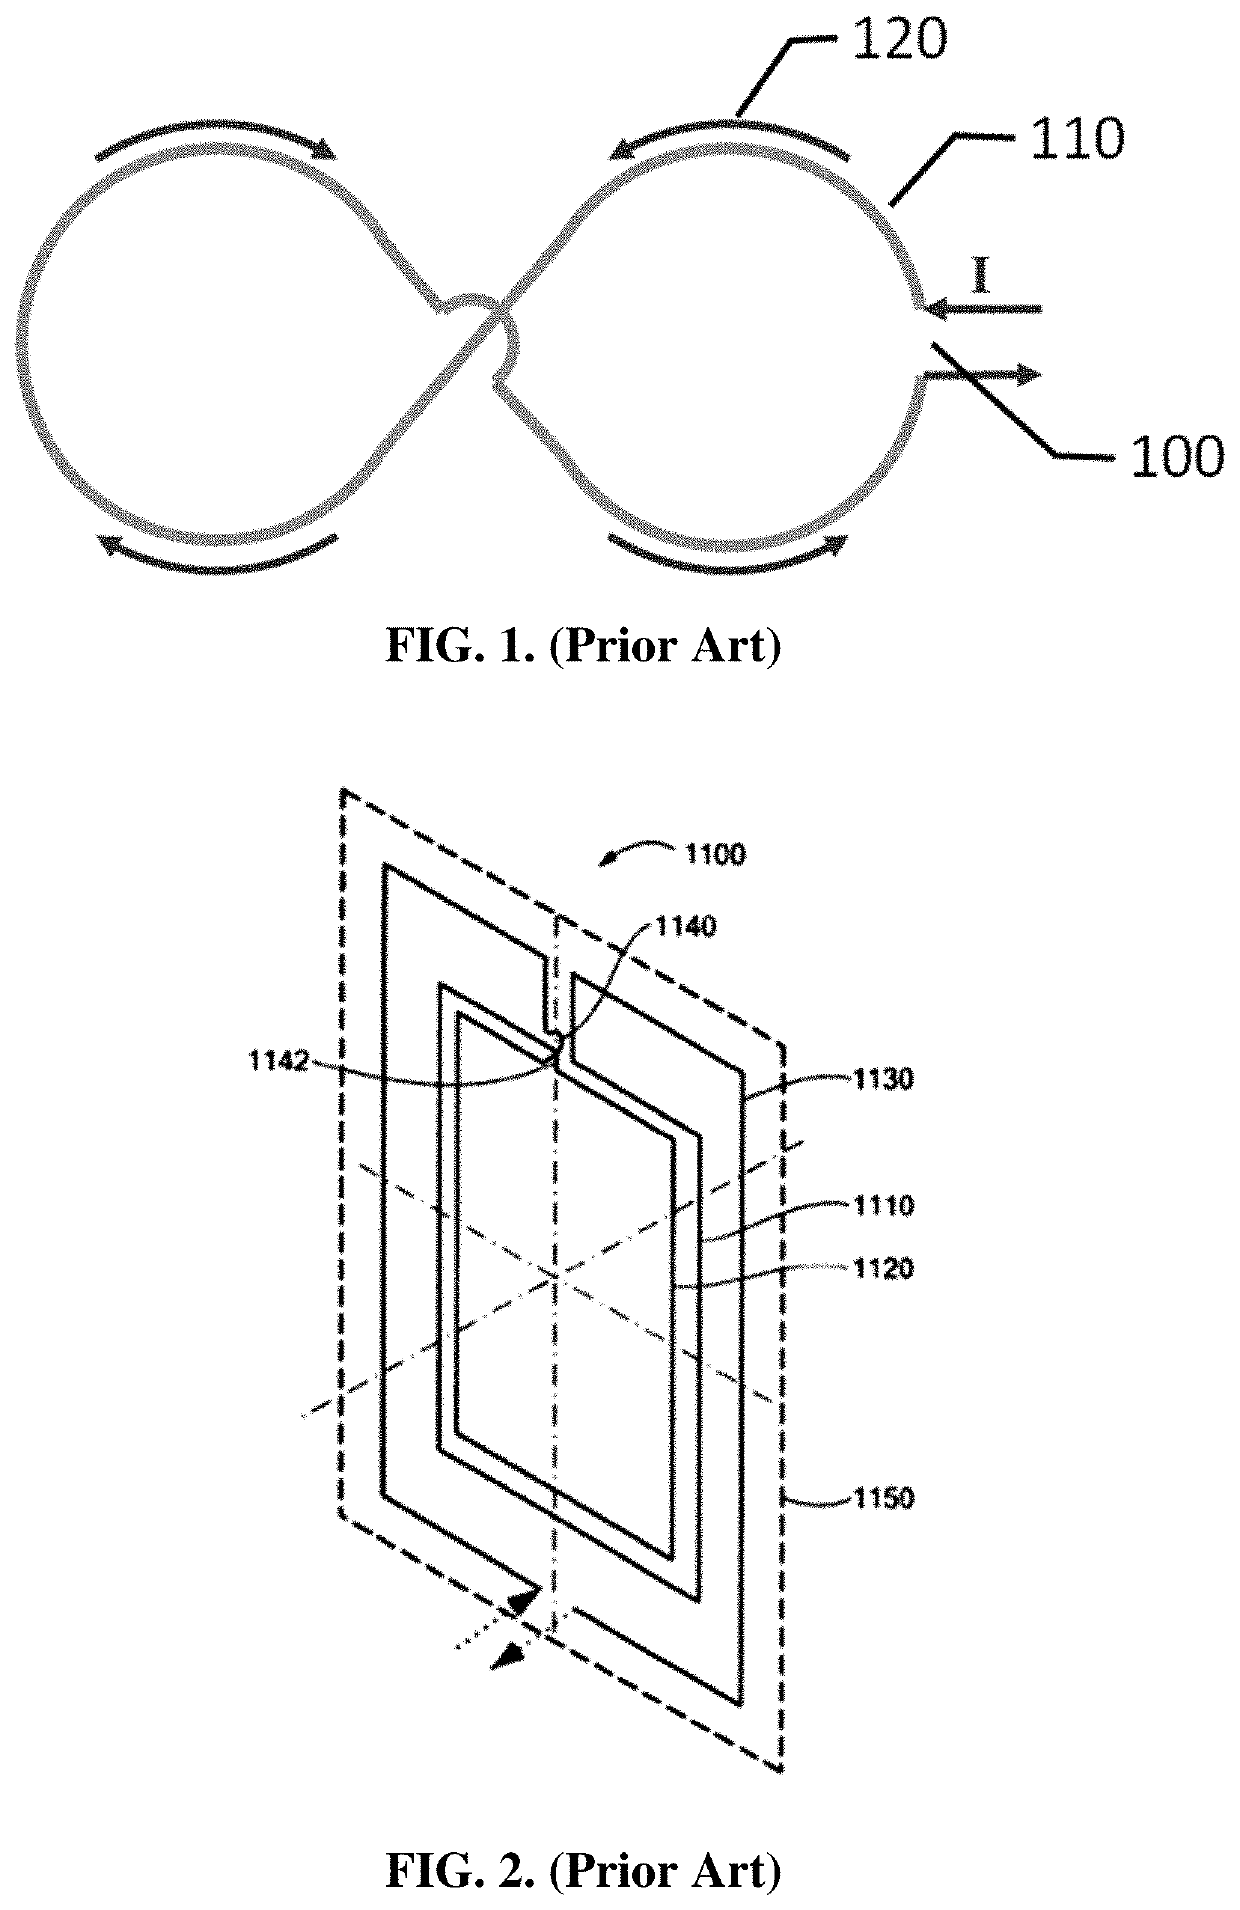 Alternative near-field gradient probe for the suppression of radio frequency interference